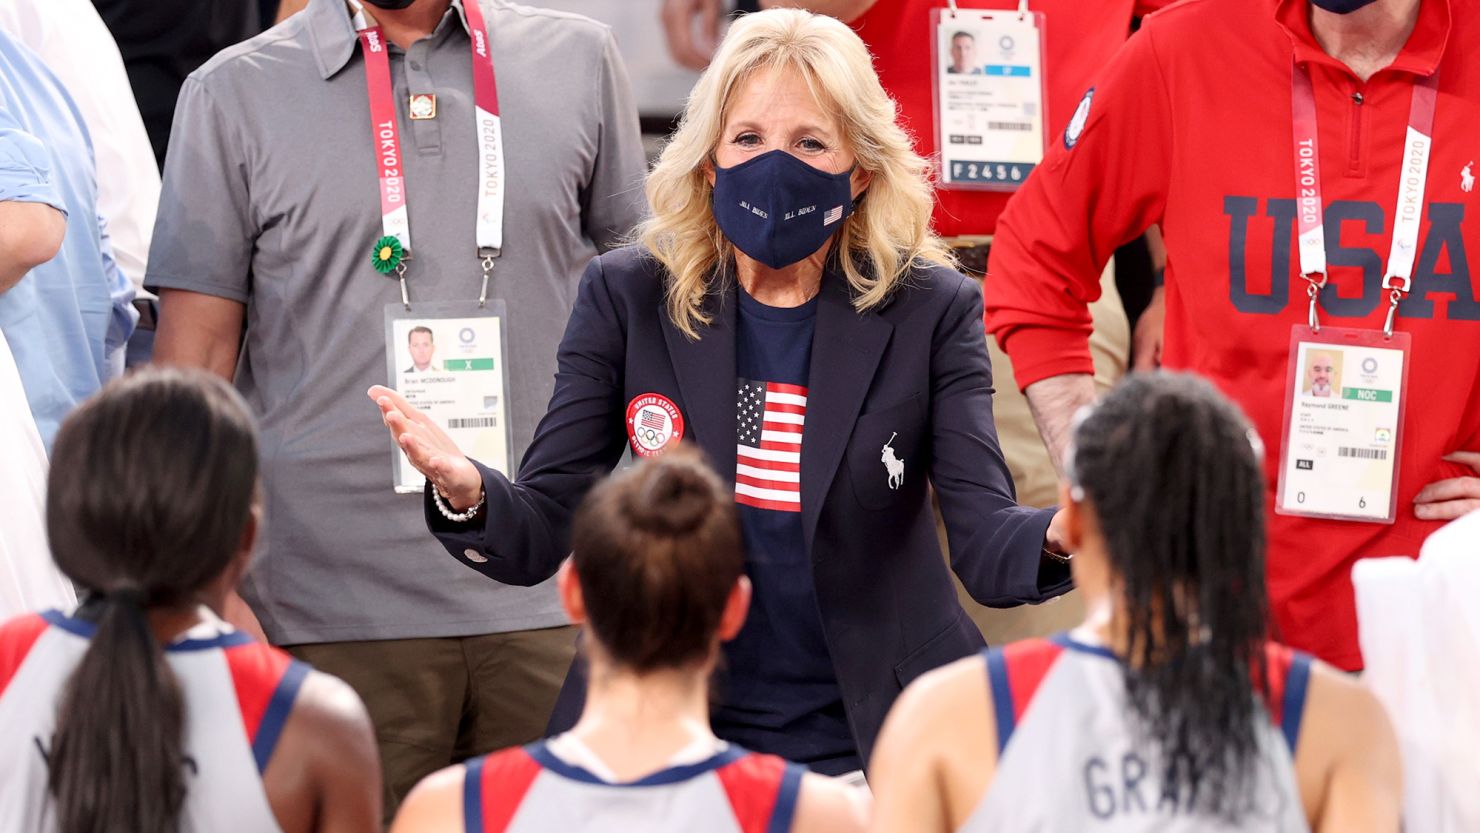 First lady Jill Biden cheers on Team USA prior to the Women's Pool Round match on day one of the Tokyo 2020 Olympic Games.